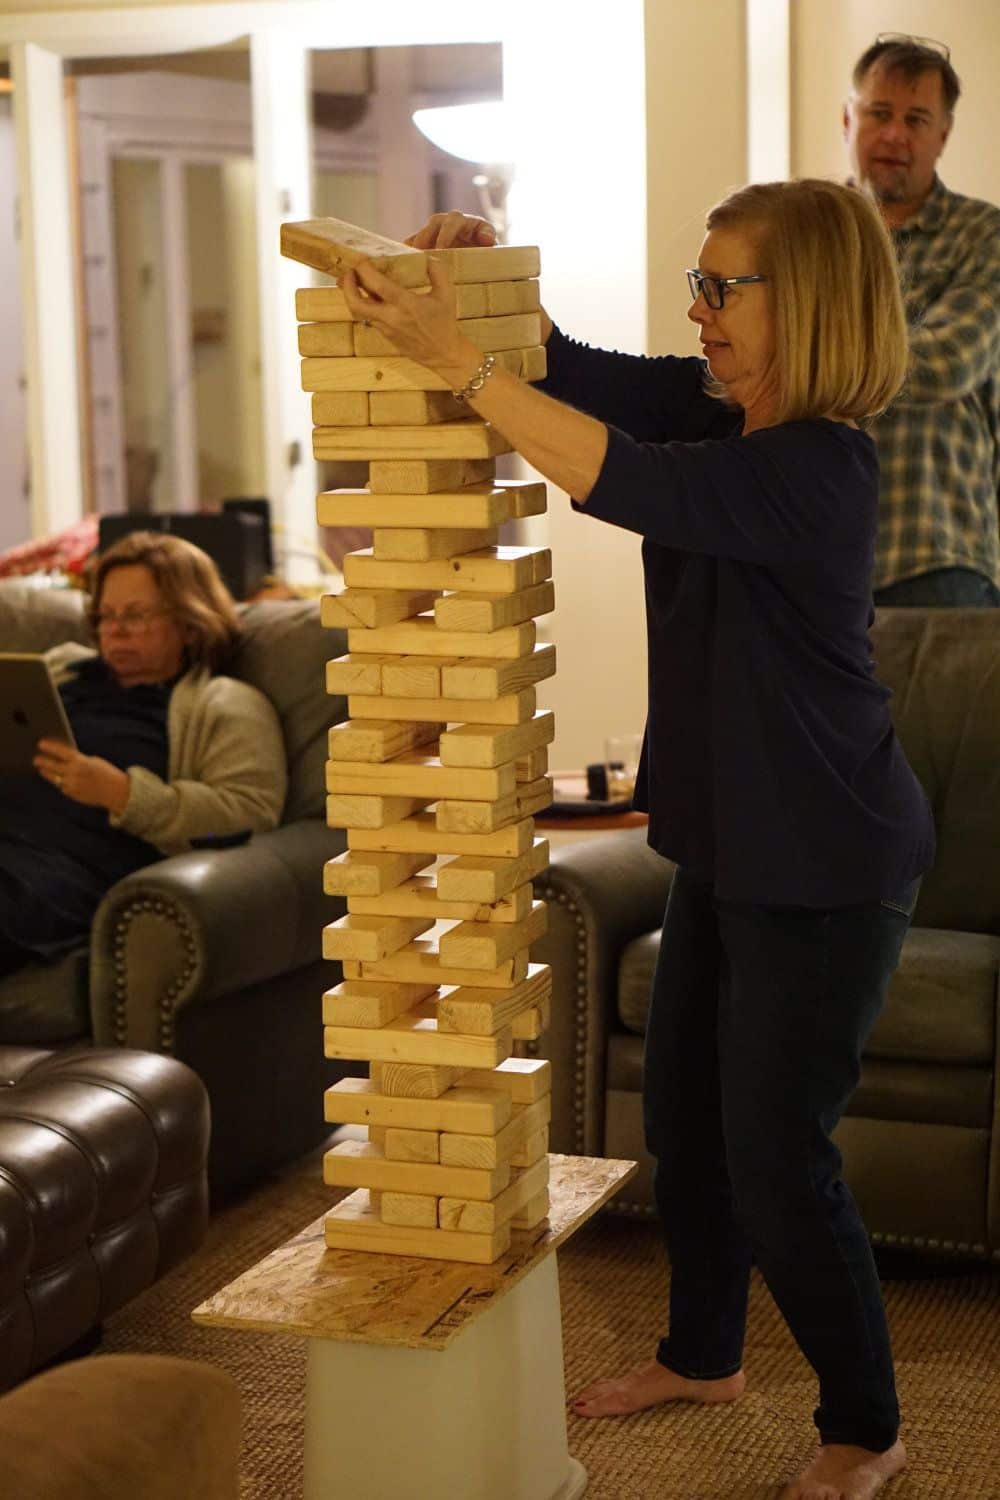 Woman attempts to move brick in a game of Giant Jenga.